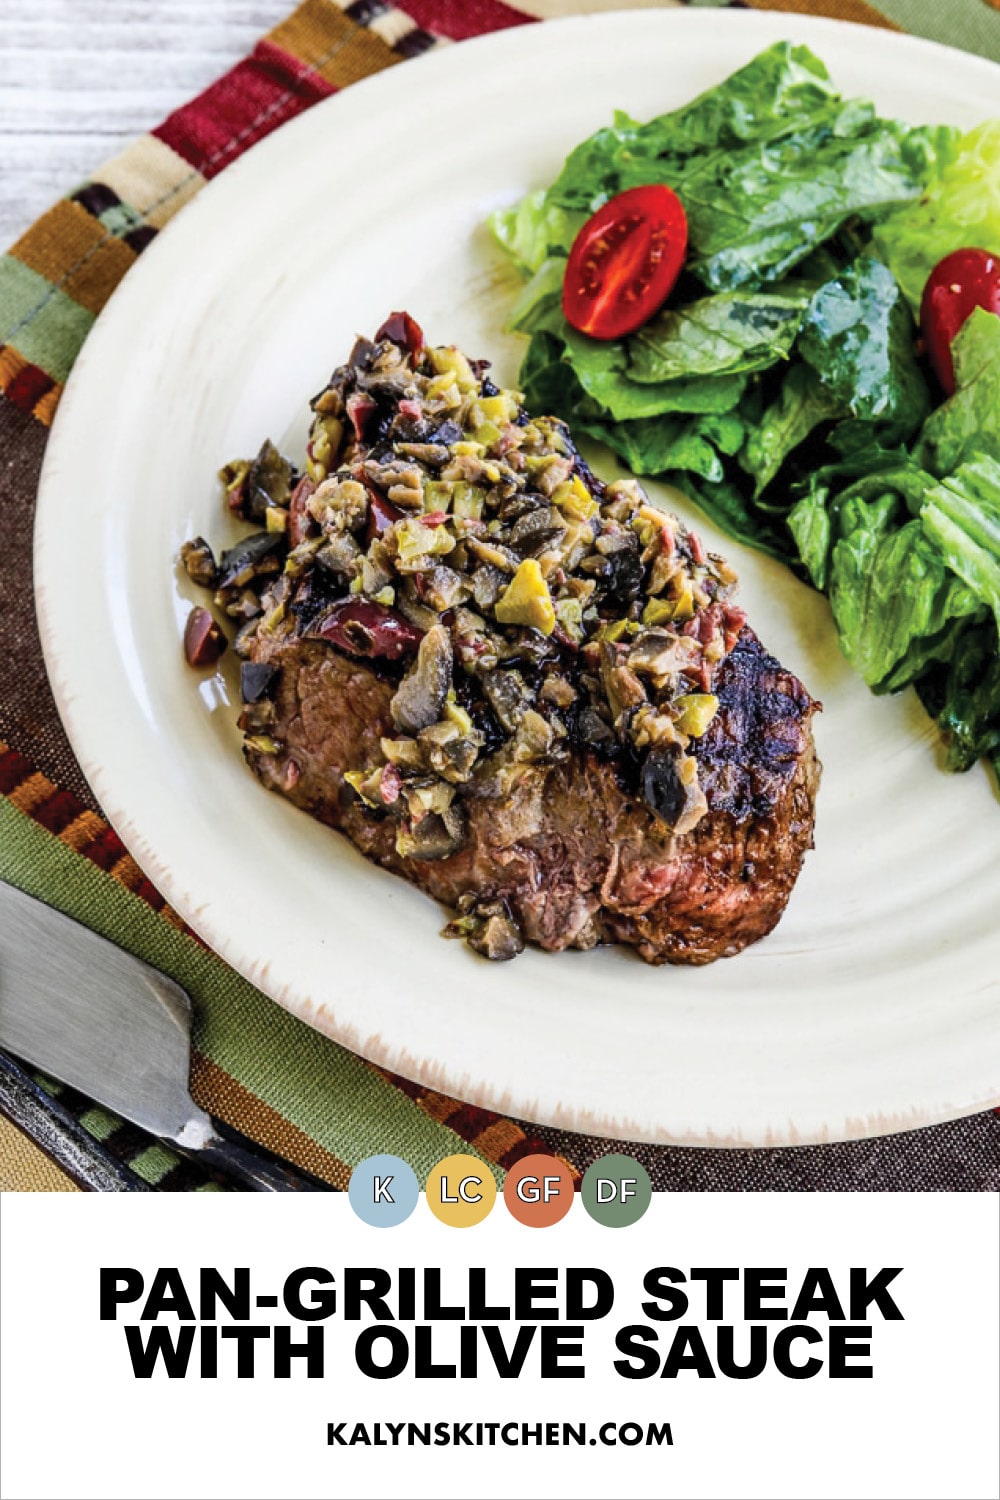 Pinterest image of Pan-Grilled Steak with Olive Sauce